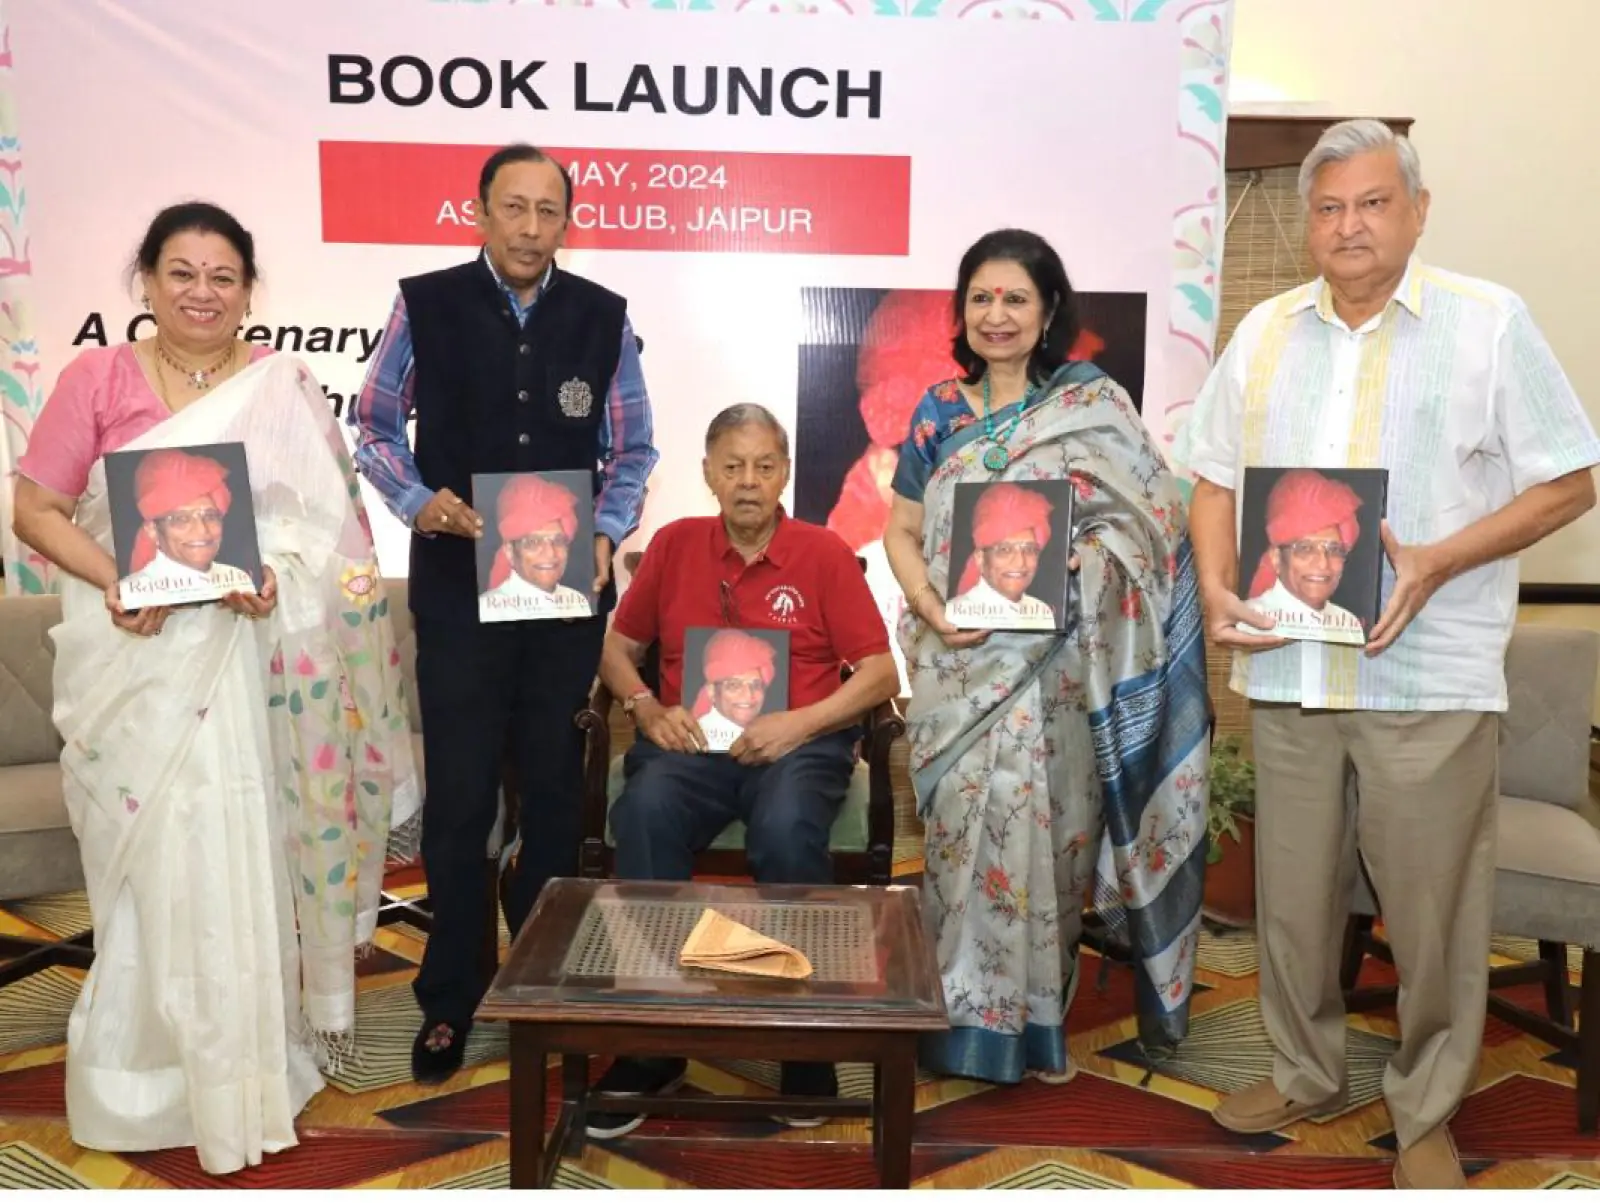 LAUNCH OF BOOK BASED ON RAGHU SINHA